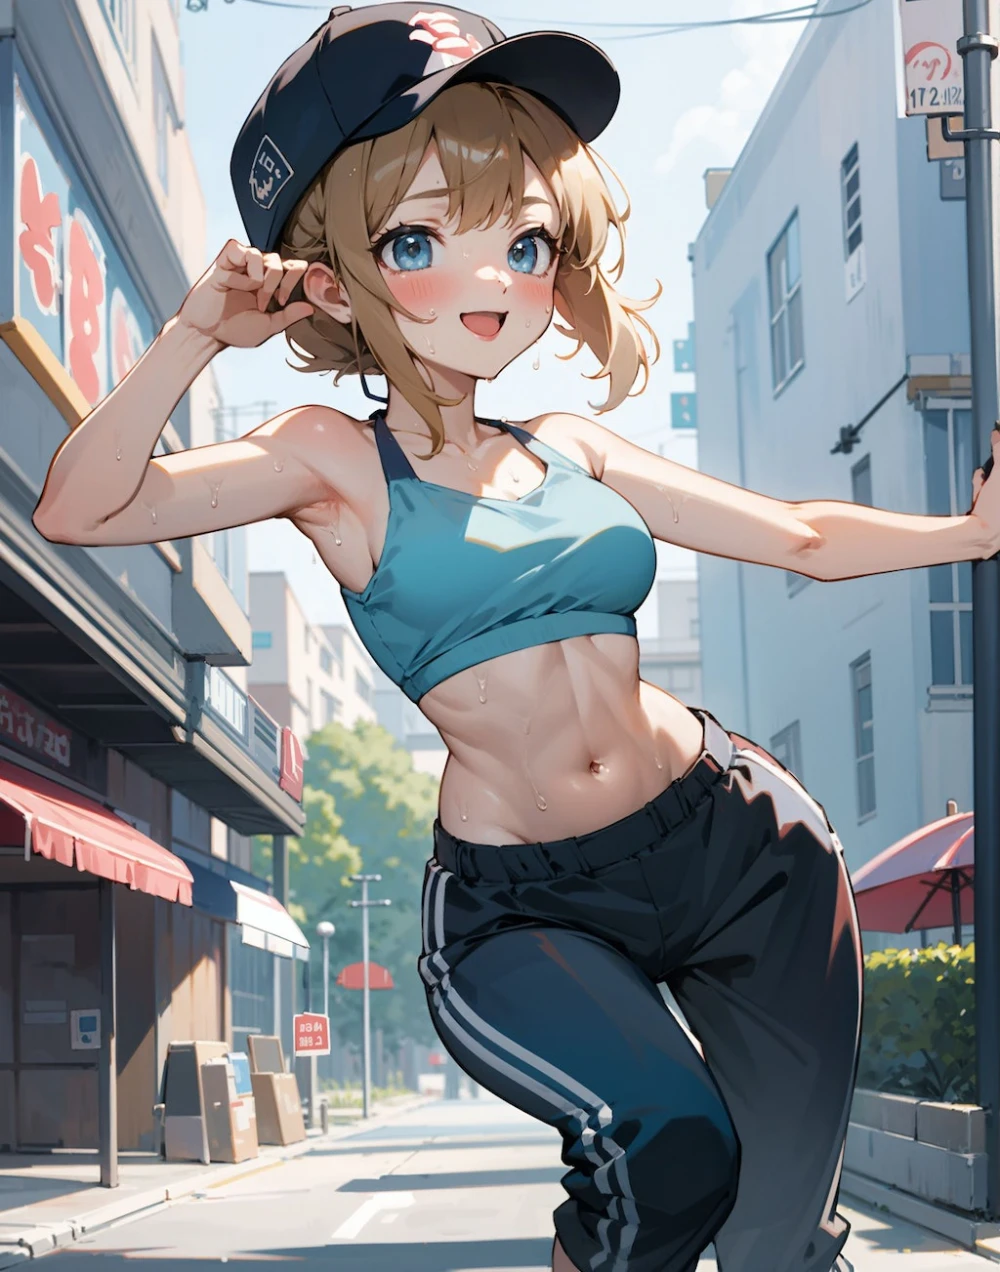 midriff-anime-style-all-ages-24